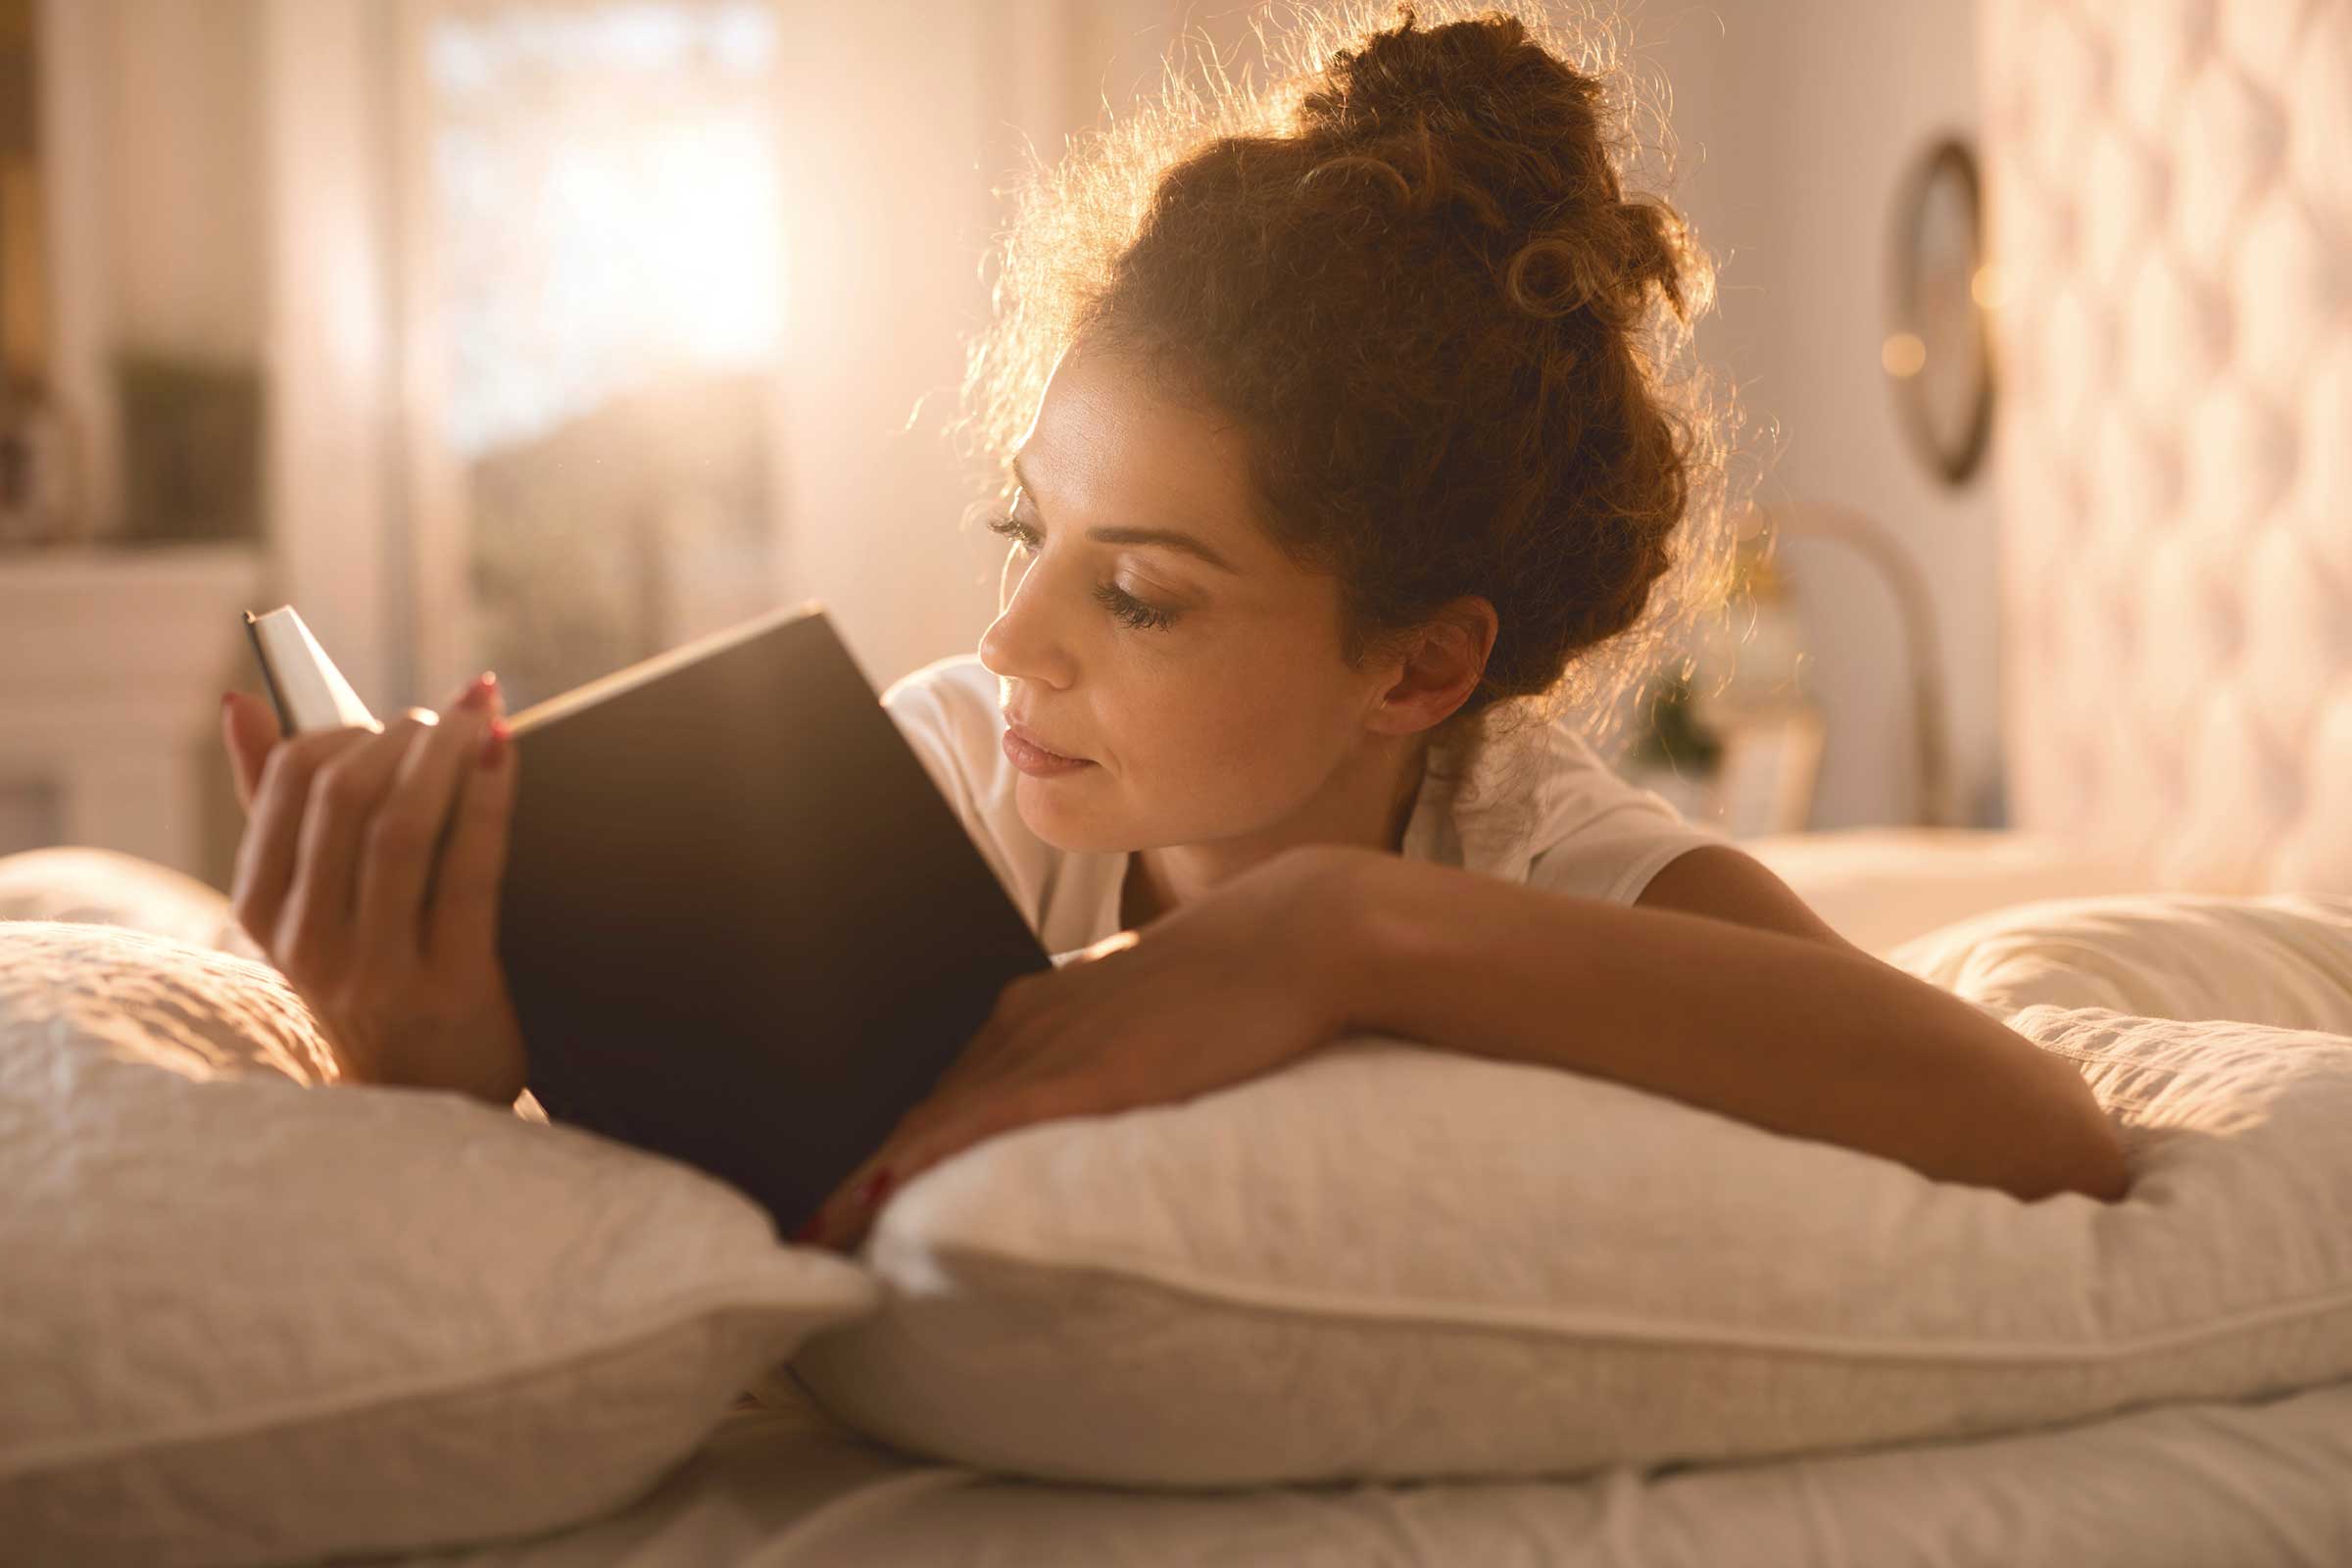 Scientific Explanations for Weird Reading Habits | Reader's Digest